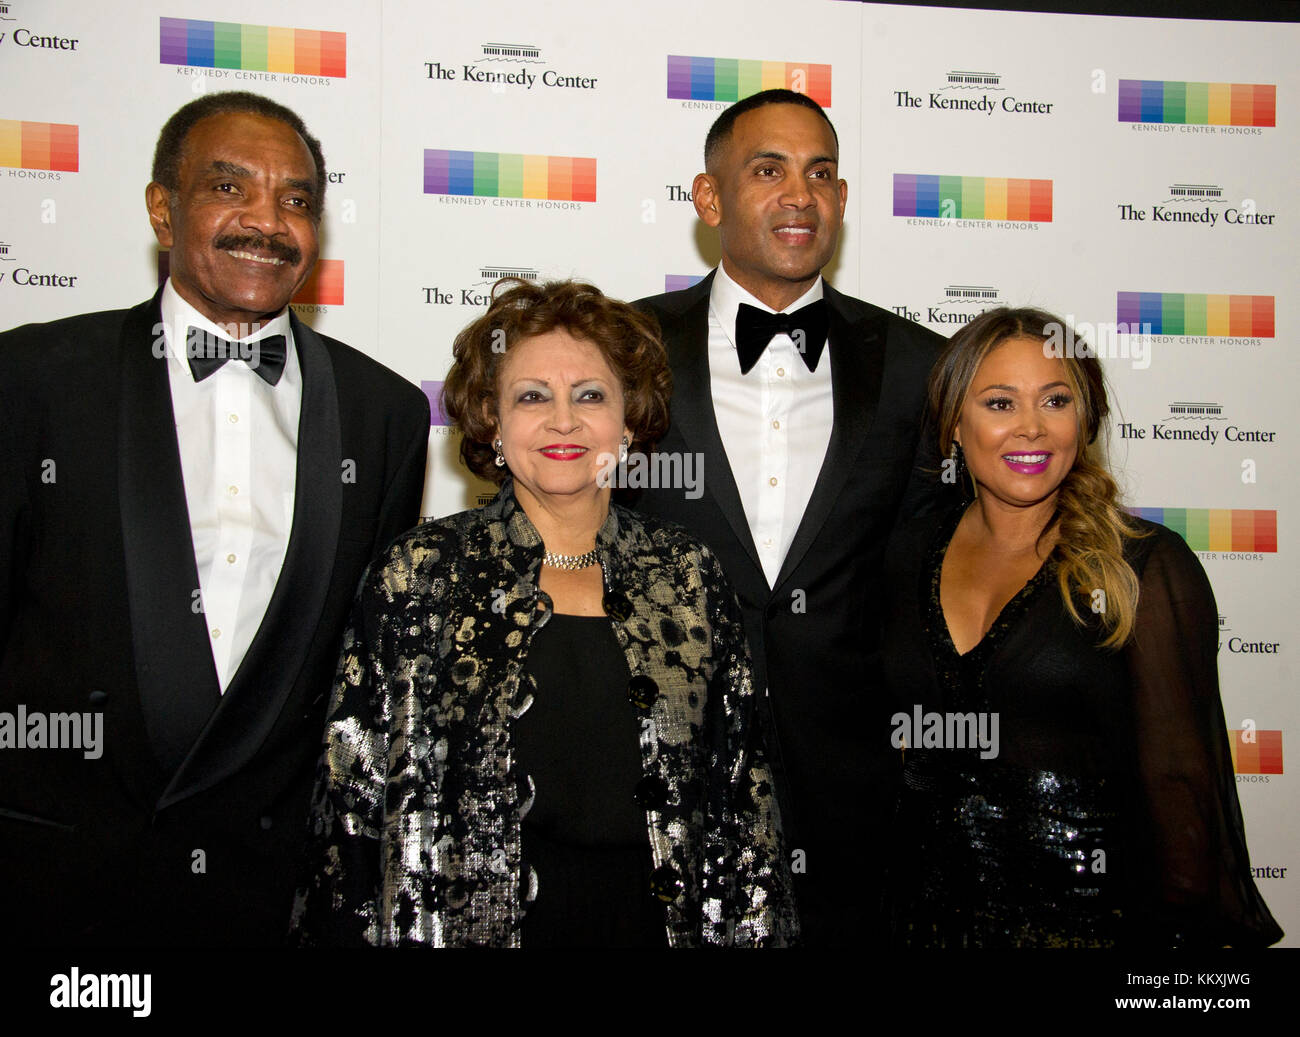 From left to right: Calvin Hill, wife Janet, Grant Hill and wife Tamia, arrive for the formal Artist's Dinner honoring the recipients of the 40th Annual Kennedy Center Honors hosted by United States Secretary of State Rex Tillerson at the US Department of State in Washington, DC on Saturday, December 2, 2017. The 2017 honorees are: American dancer and choreographer Carmen de Lavallade; Cuban American singer-songwriter and actress Gloria Estefan; American hip hop artist and entertainment icon LL COOL J; American television writer and producer Norman Lear; and American musician and record prod Stock Photo